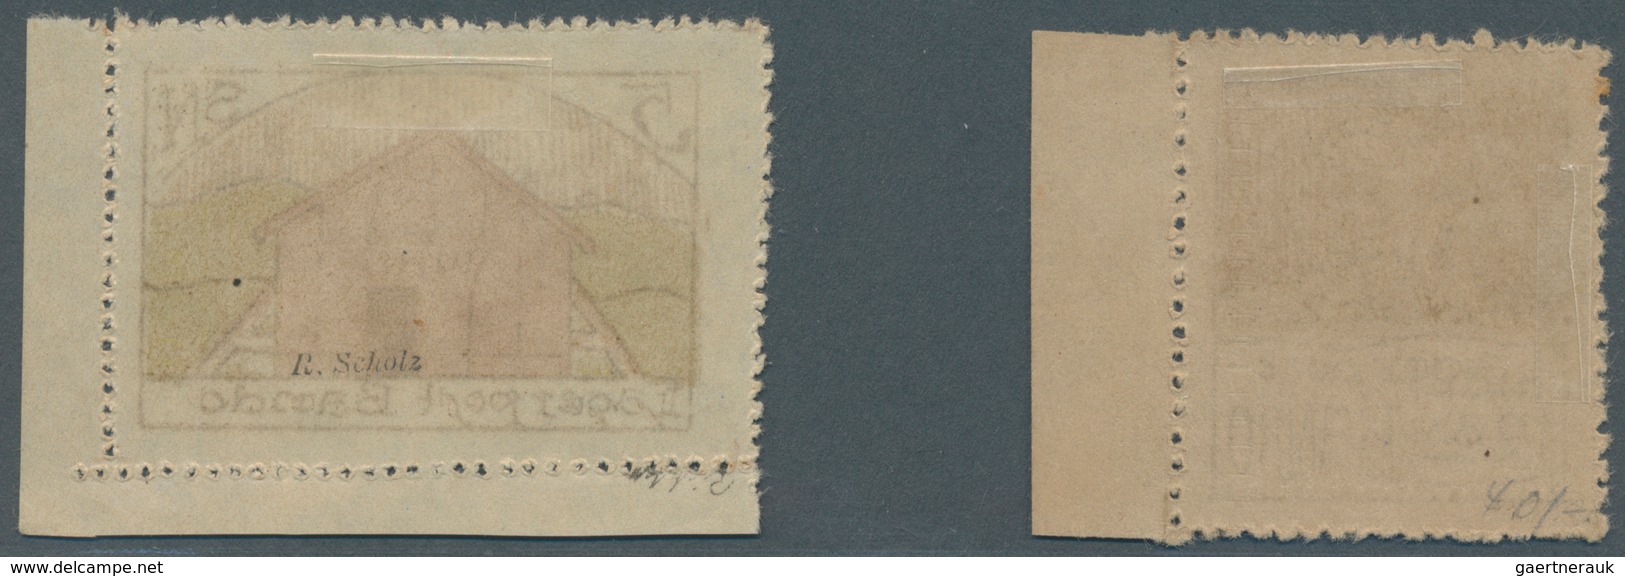 Lagerpost Tsingtau: 1918, Lagerpost Stamps 2 S., A Right Margin Cop. And 5 S. , A Right Corner Margi - China (kantoren)